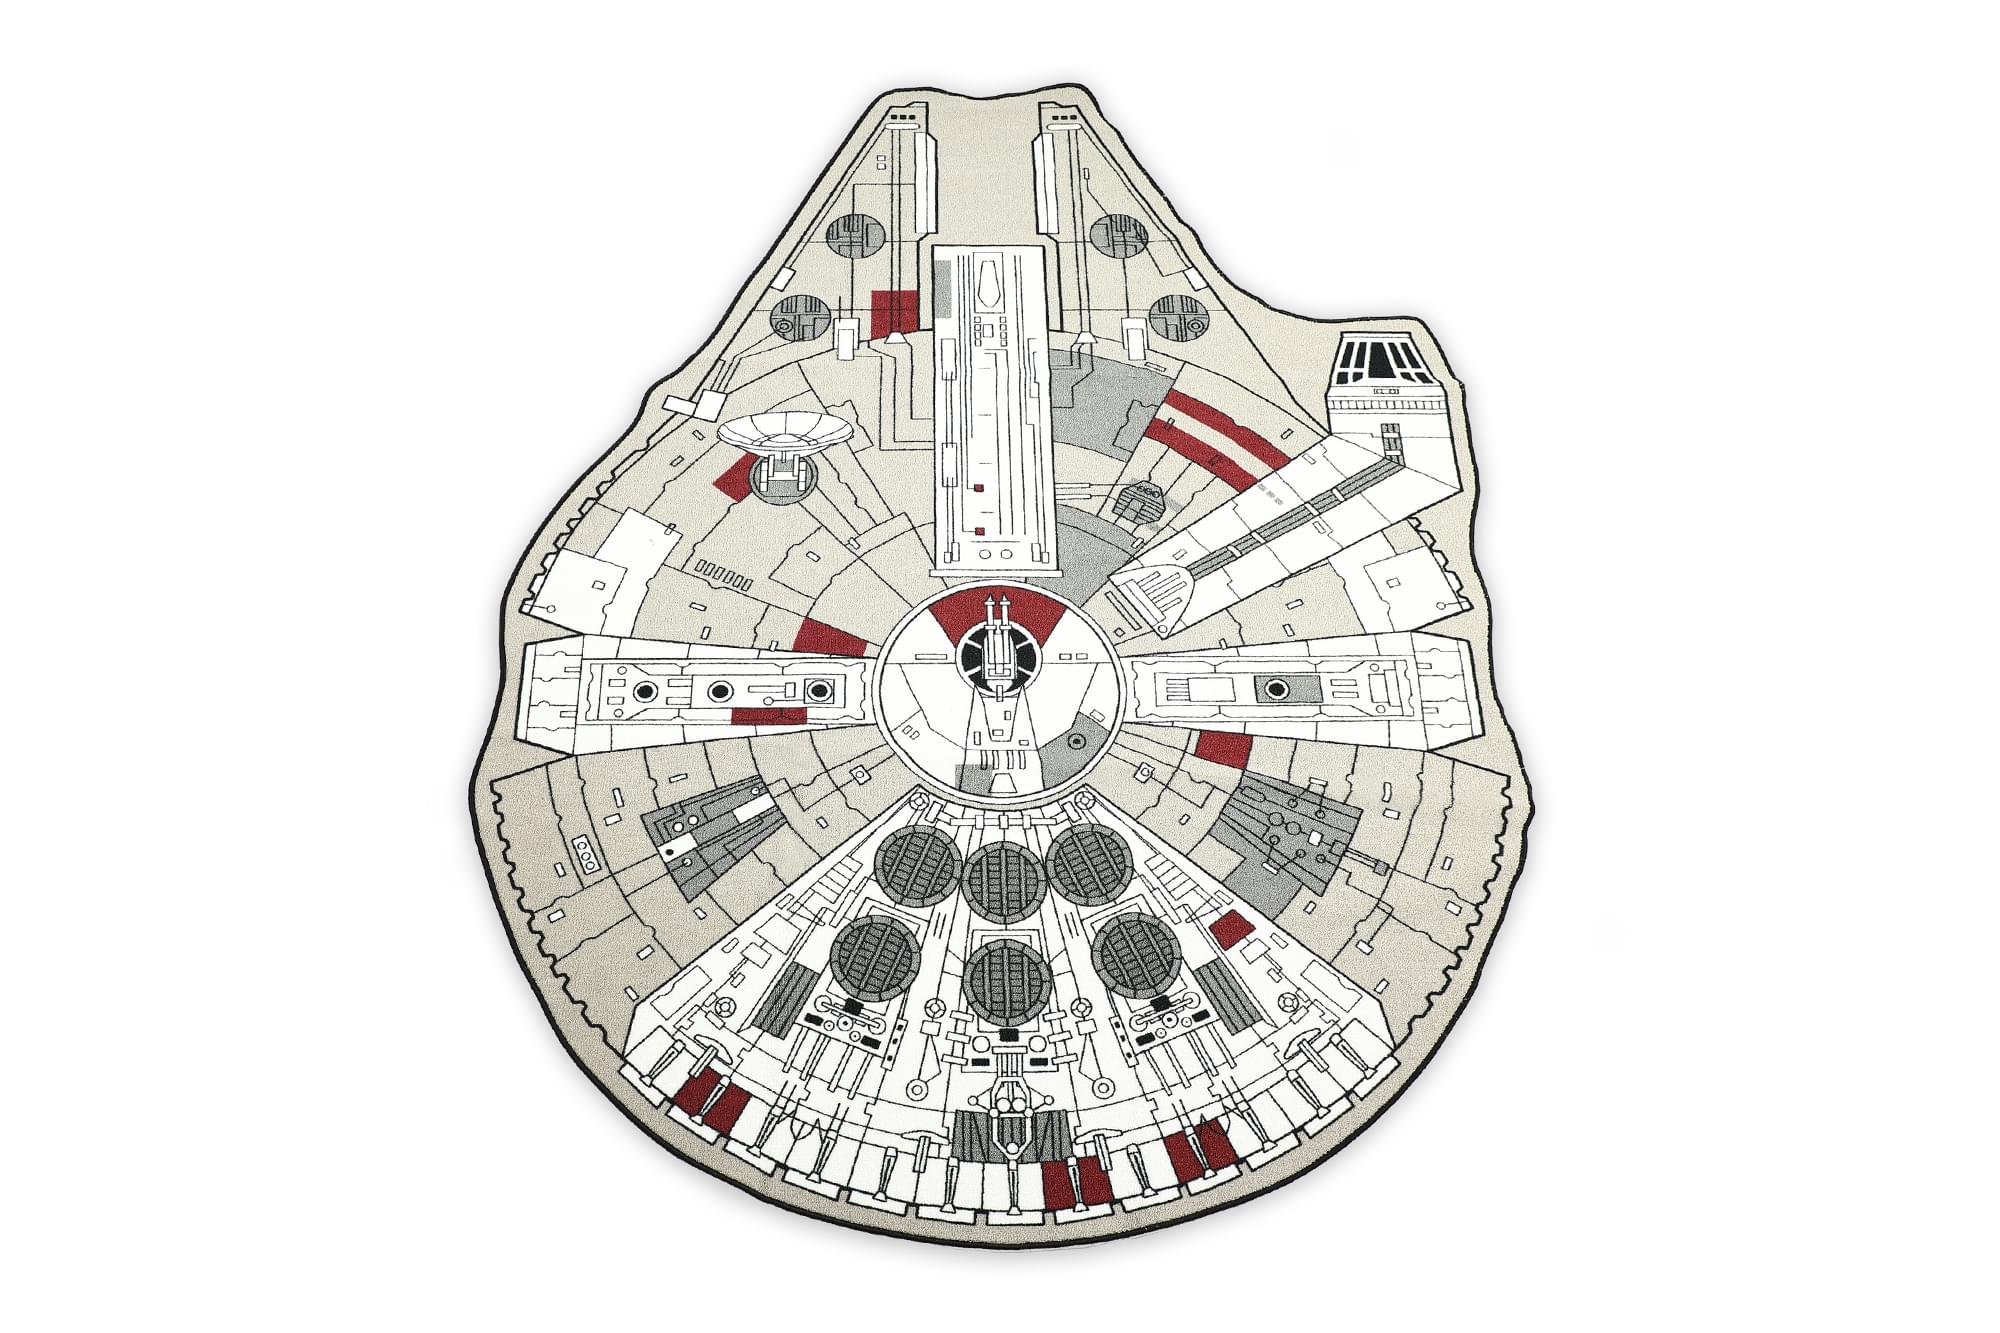 Star Wars Large Millennium Falcon Entry or Area Rug, 59" L x 79" W - image 1 of 7